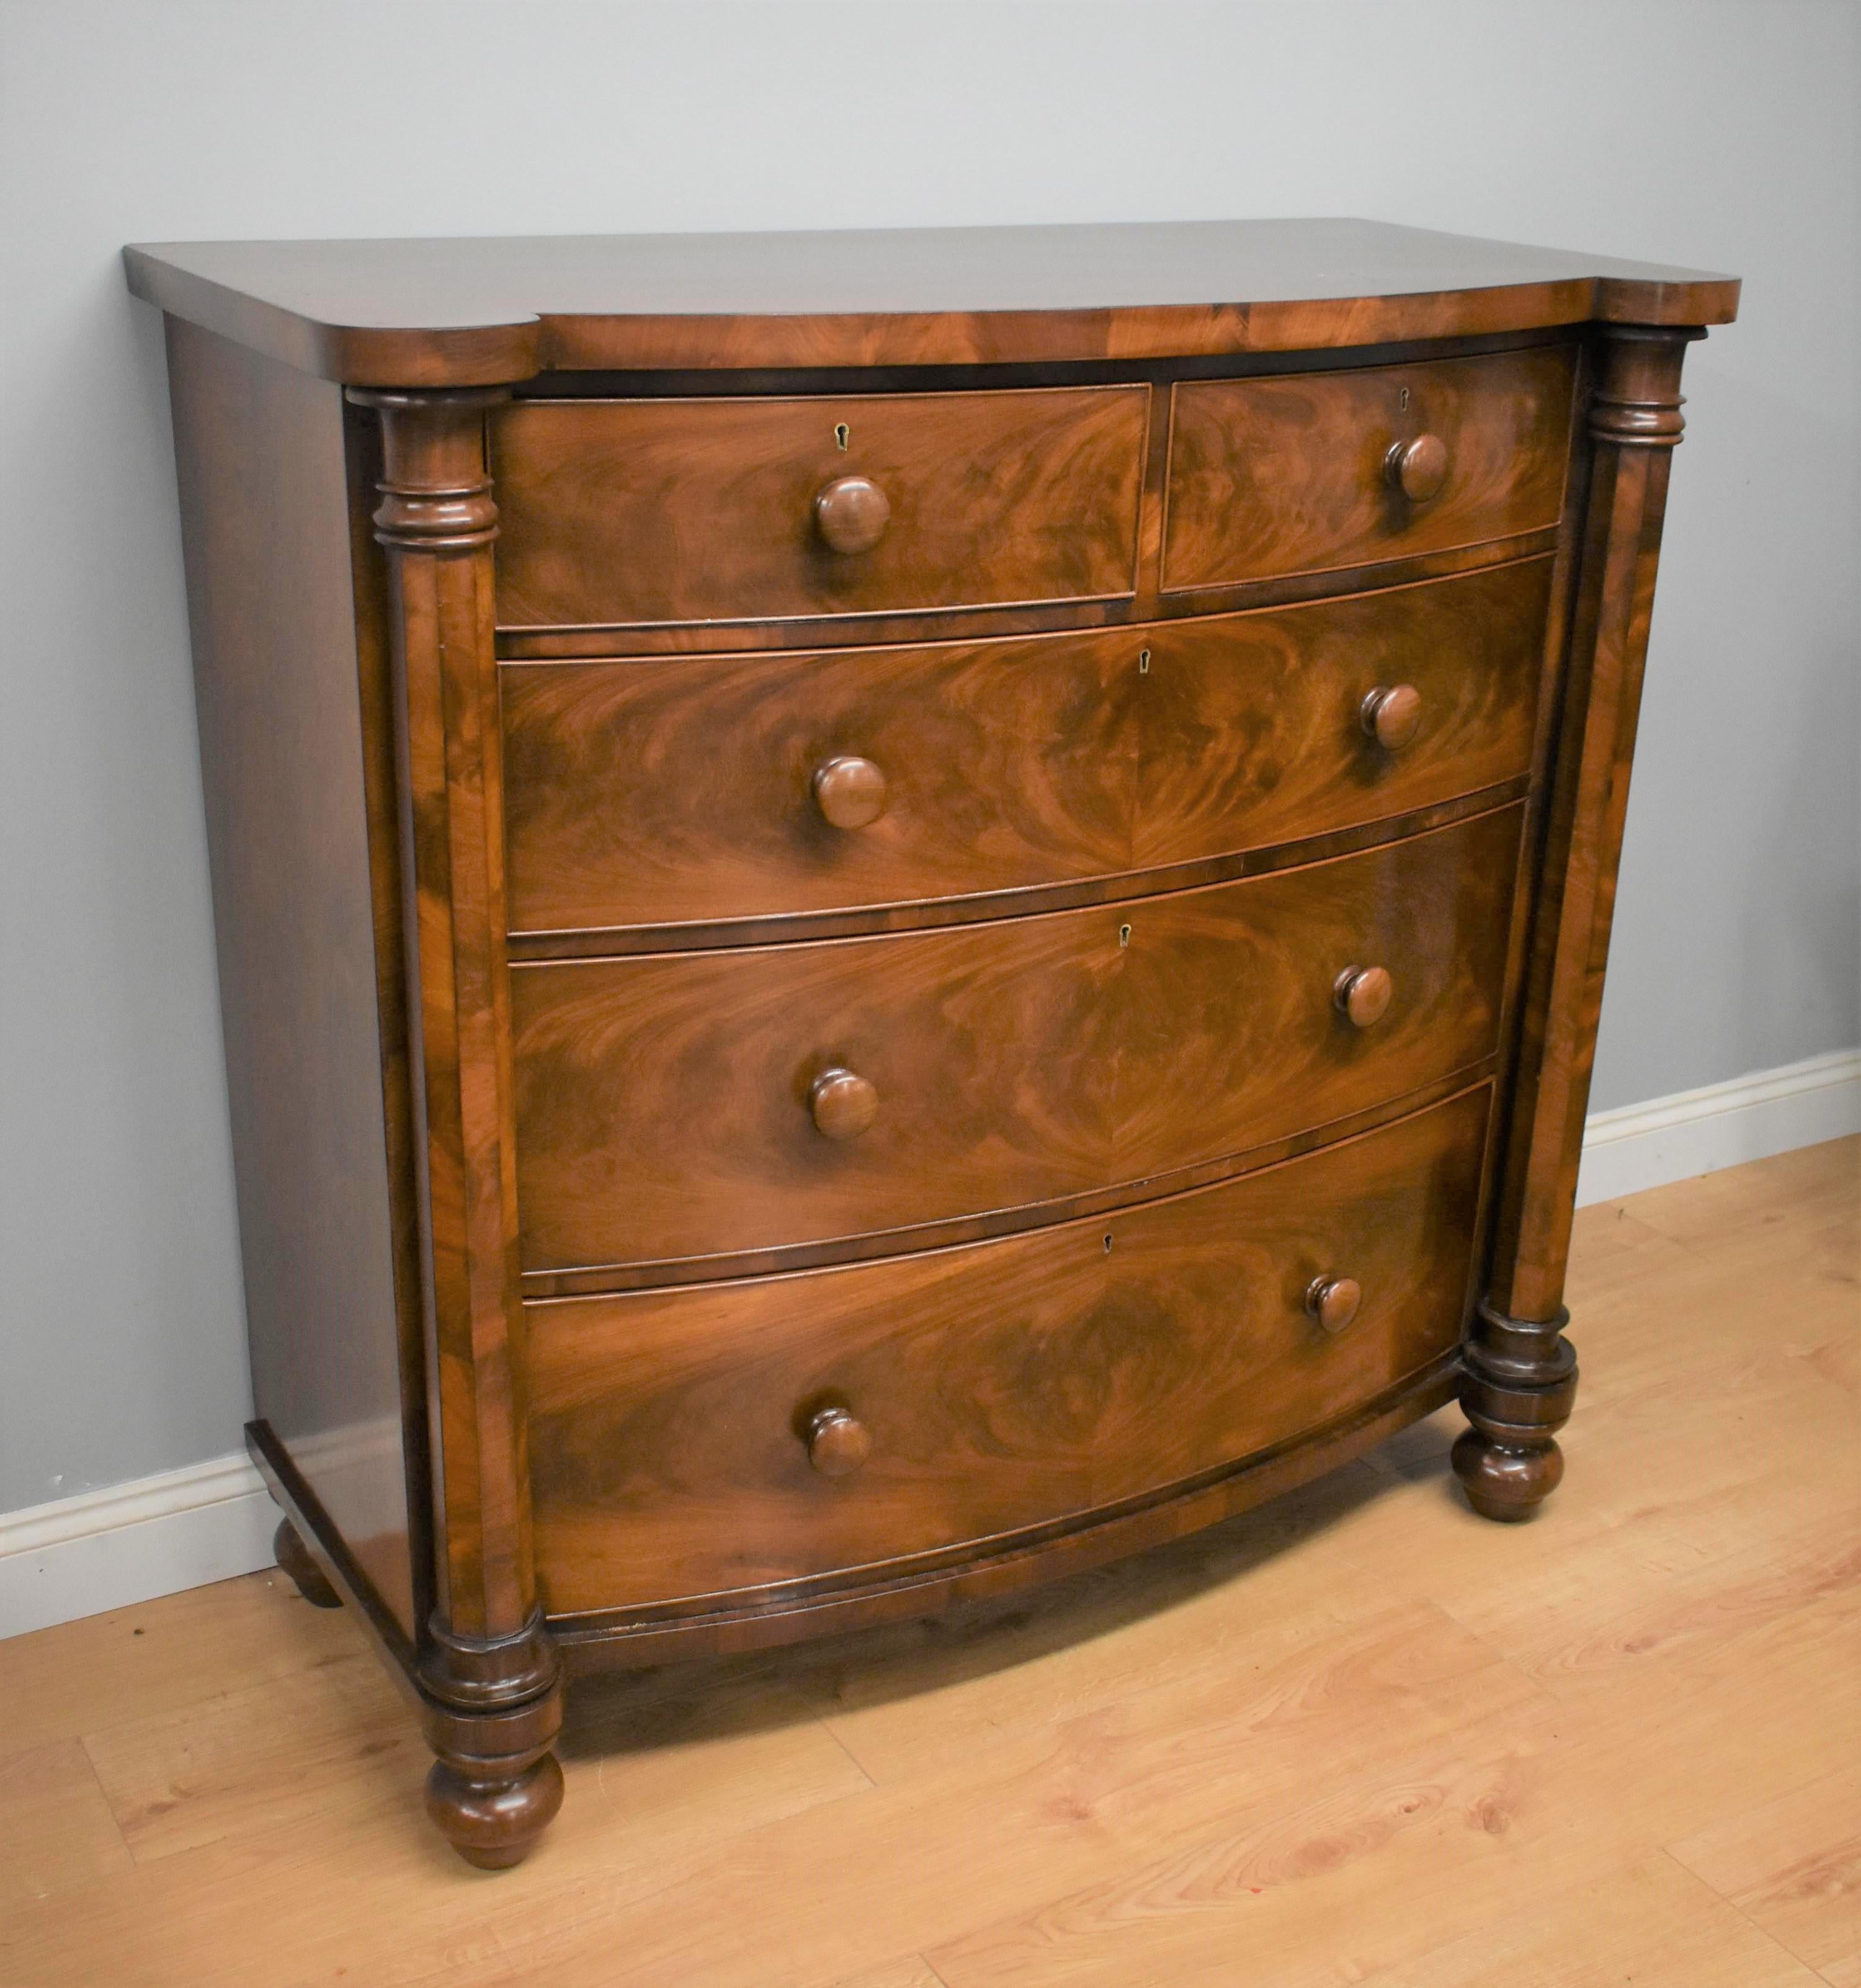 Victorian antique mahogany bow front chest of drawers in very nice condition having been fully restored and polished using traditional methods. The chest has two short over three long drawers.